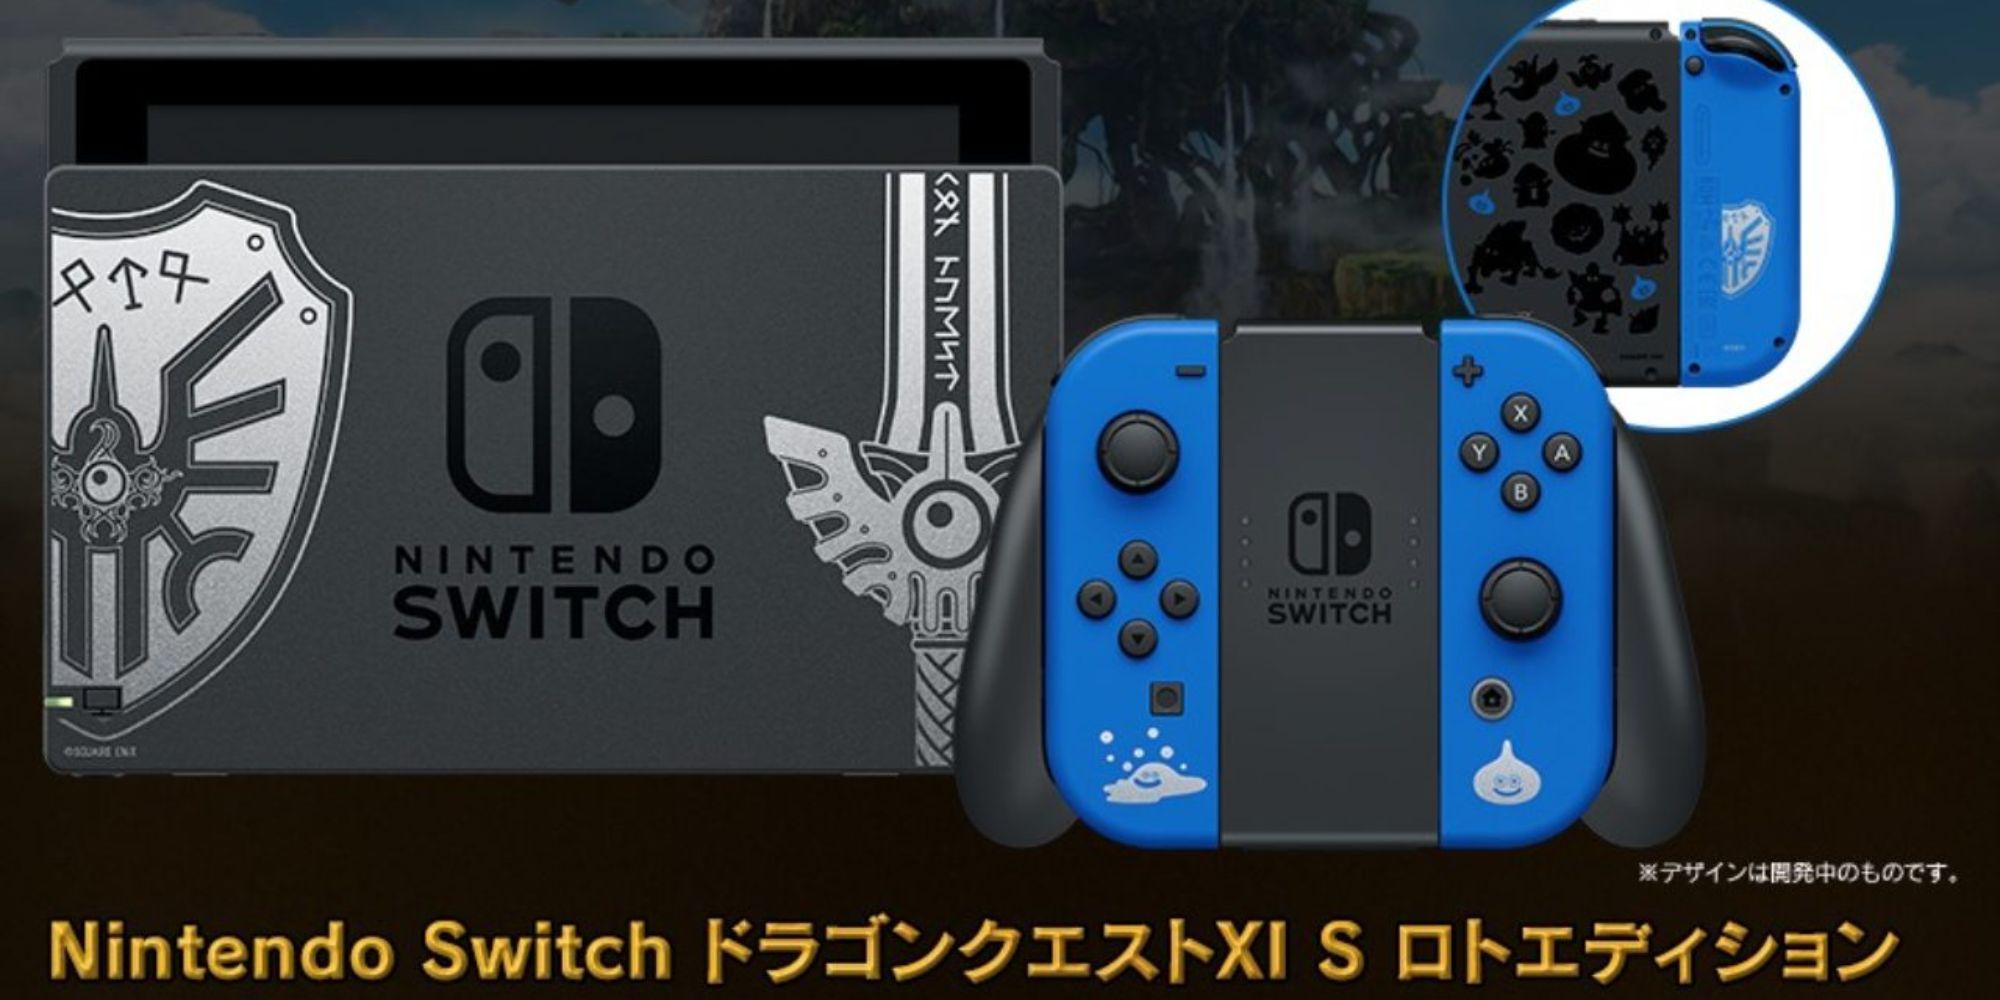 Nintendo Switch with blue Joy-Cons featuring Slime with a sword and shield dock for Dragon Quest XI